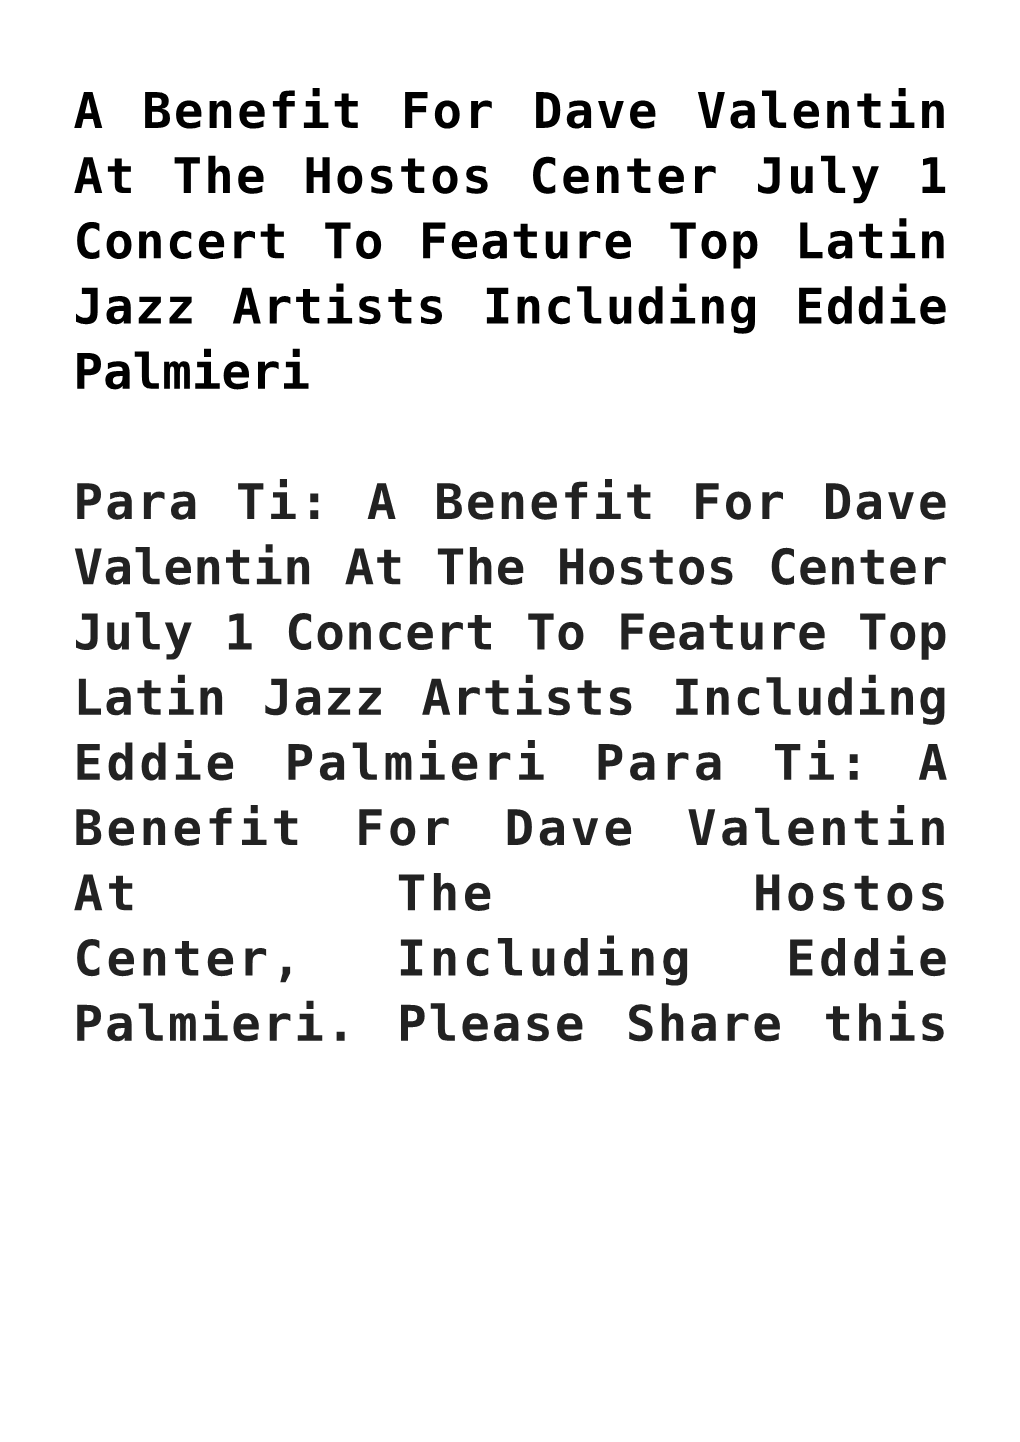 A Benefit for Dave Valentin at the Hostos Center July 1 Concert to Feature Top Latin Jazz Artists Including Eddie Palmieri